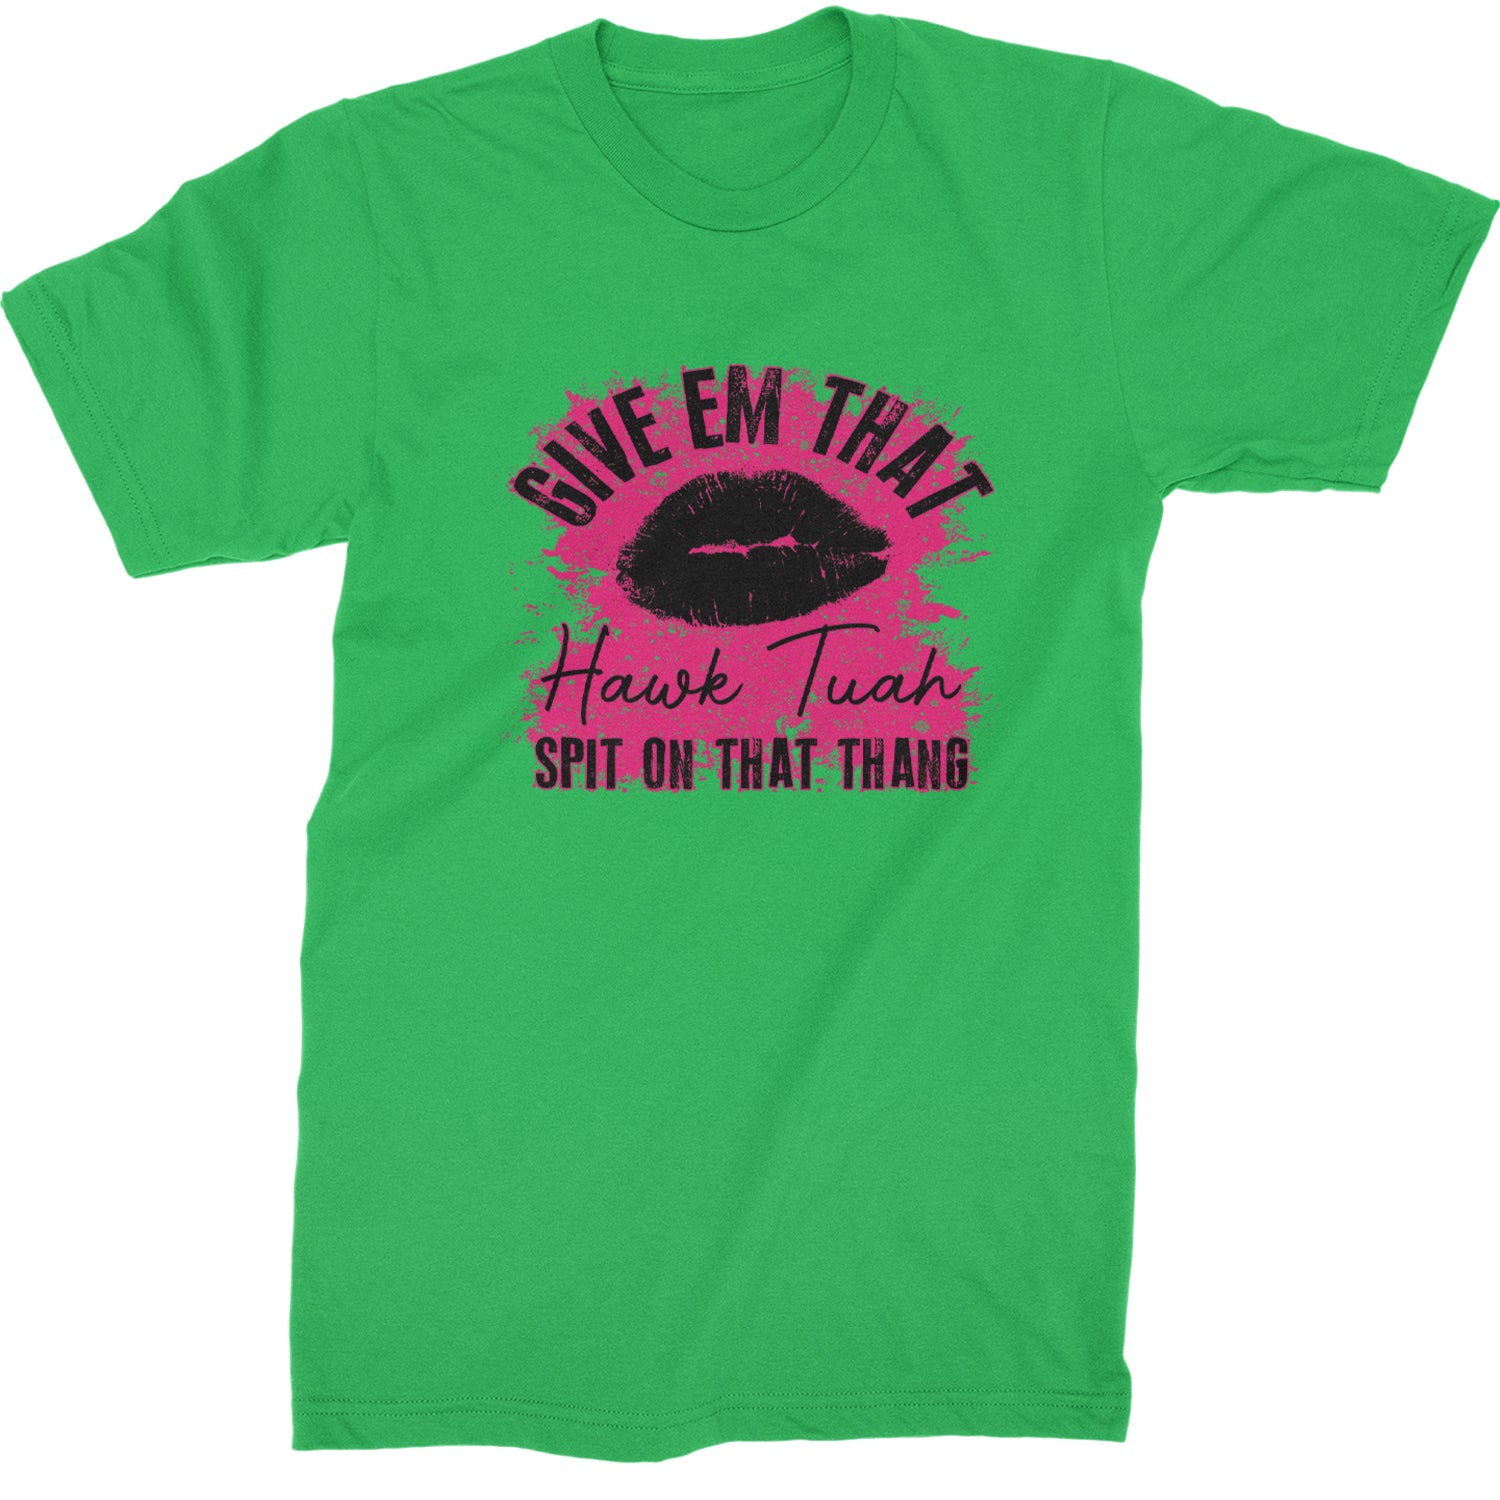 Give 'Em Hawk Tuah Spit On That Thang Mens T-shirt Kelly Green